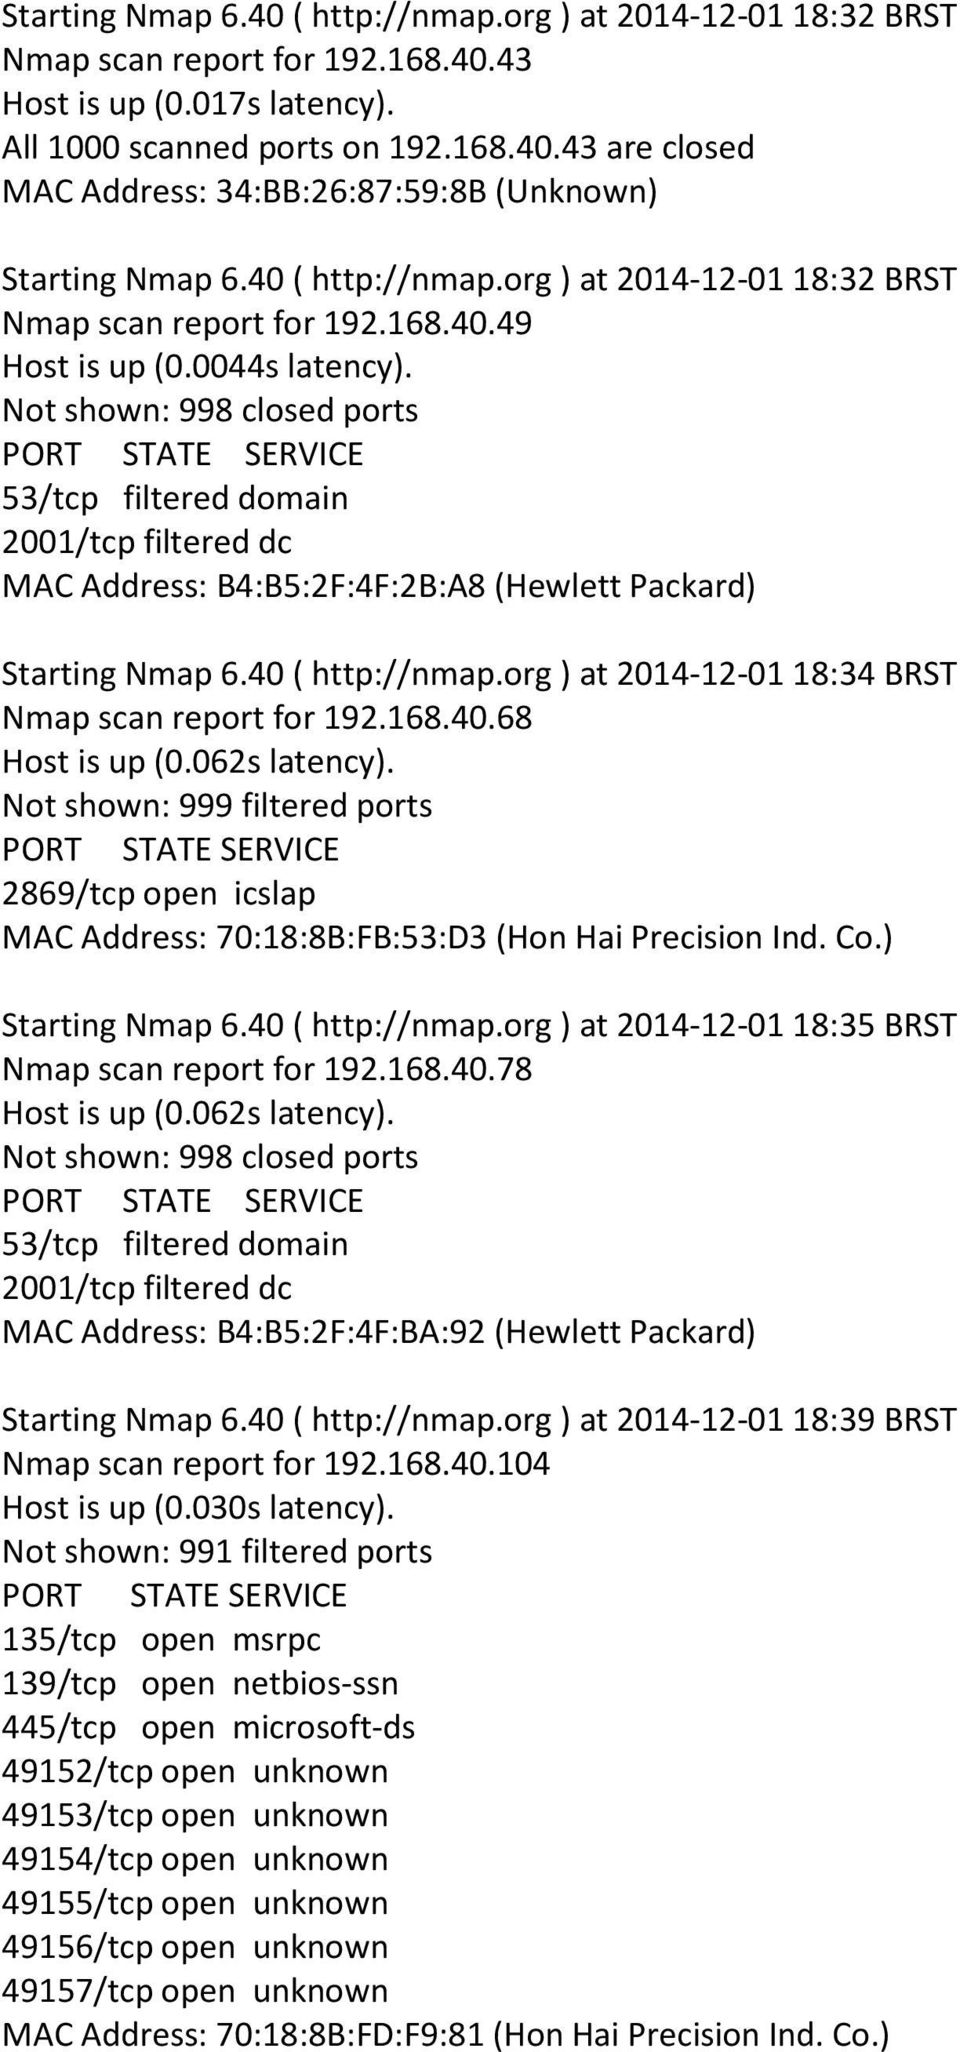 168.40.68 Host is up (0.062s latency). Not shown: 999 filtered ports MAC Address: 70:18:8B:FB:53:D3 (Hon Hai Precision Ind. Co.) Starting Nmap 6.40 ( http://nmap.